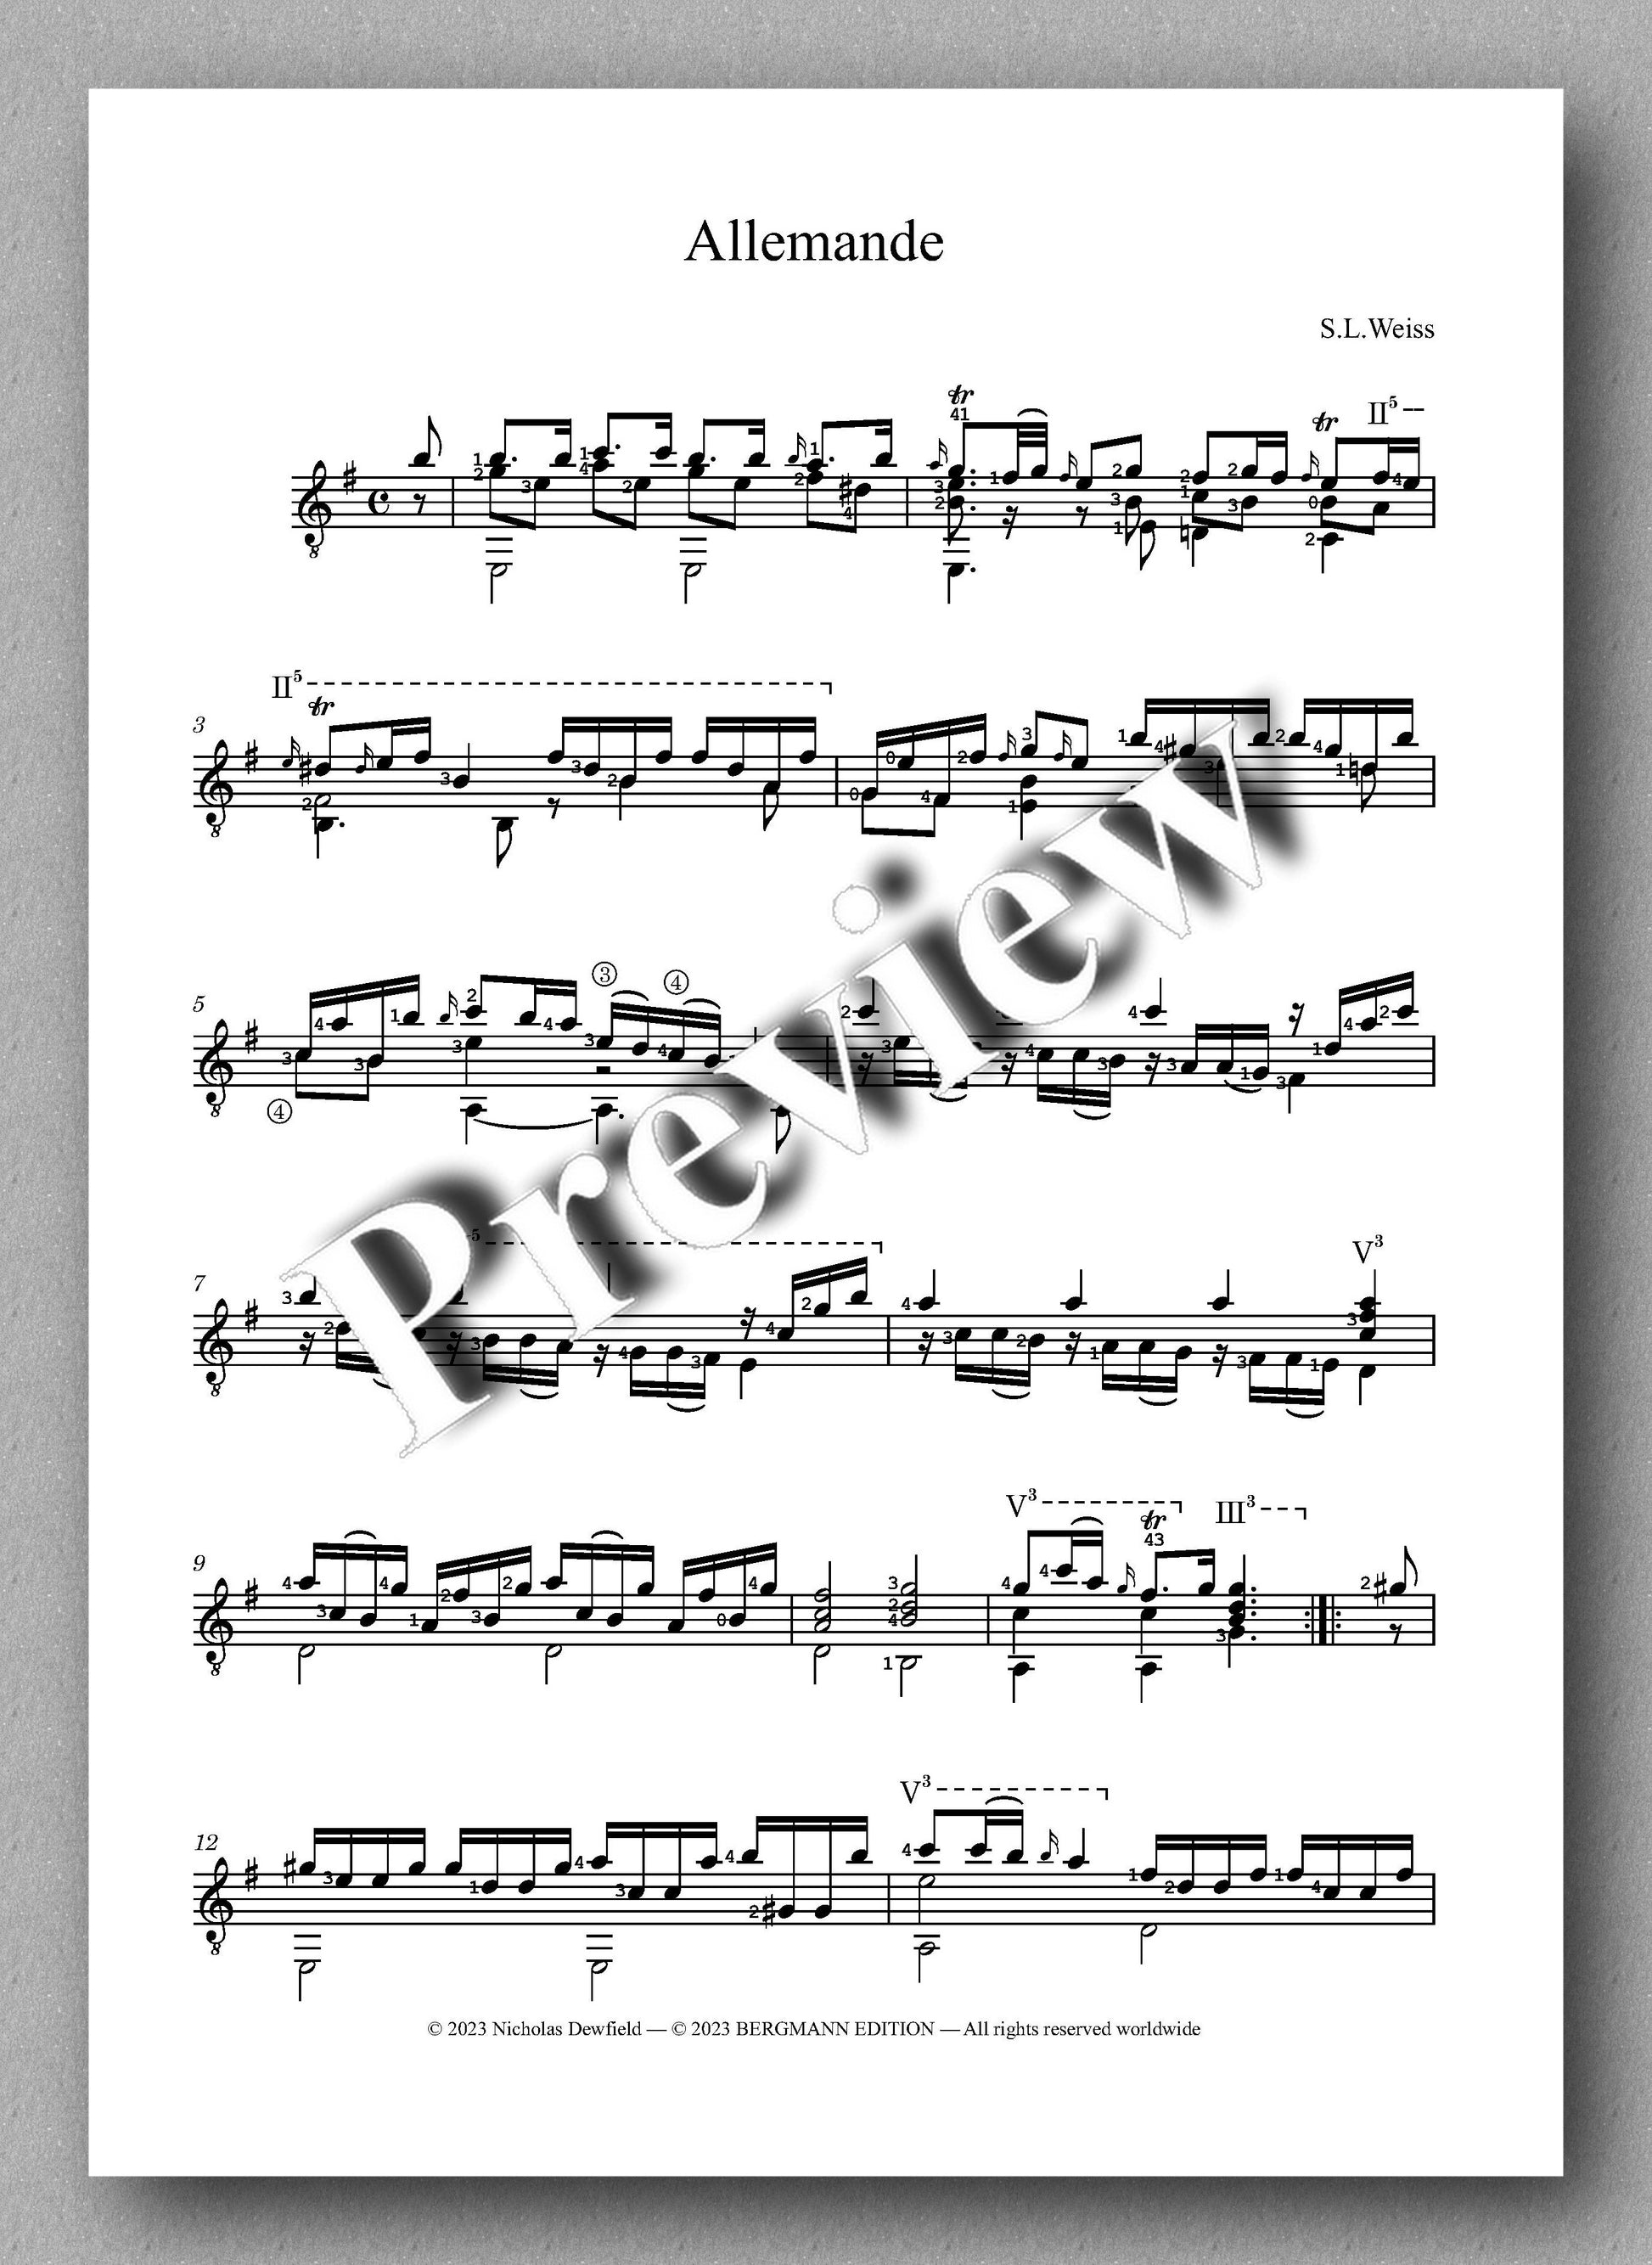 Sylvius Leopold Weiss (1687-1750), Sonata No. 21 - preview of the music score 1